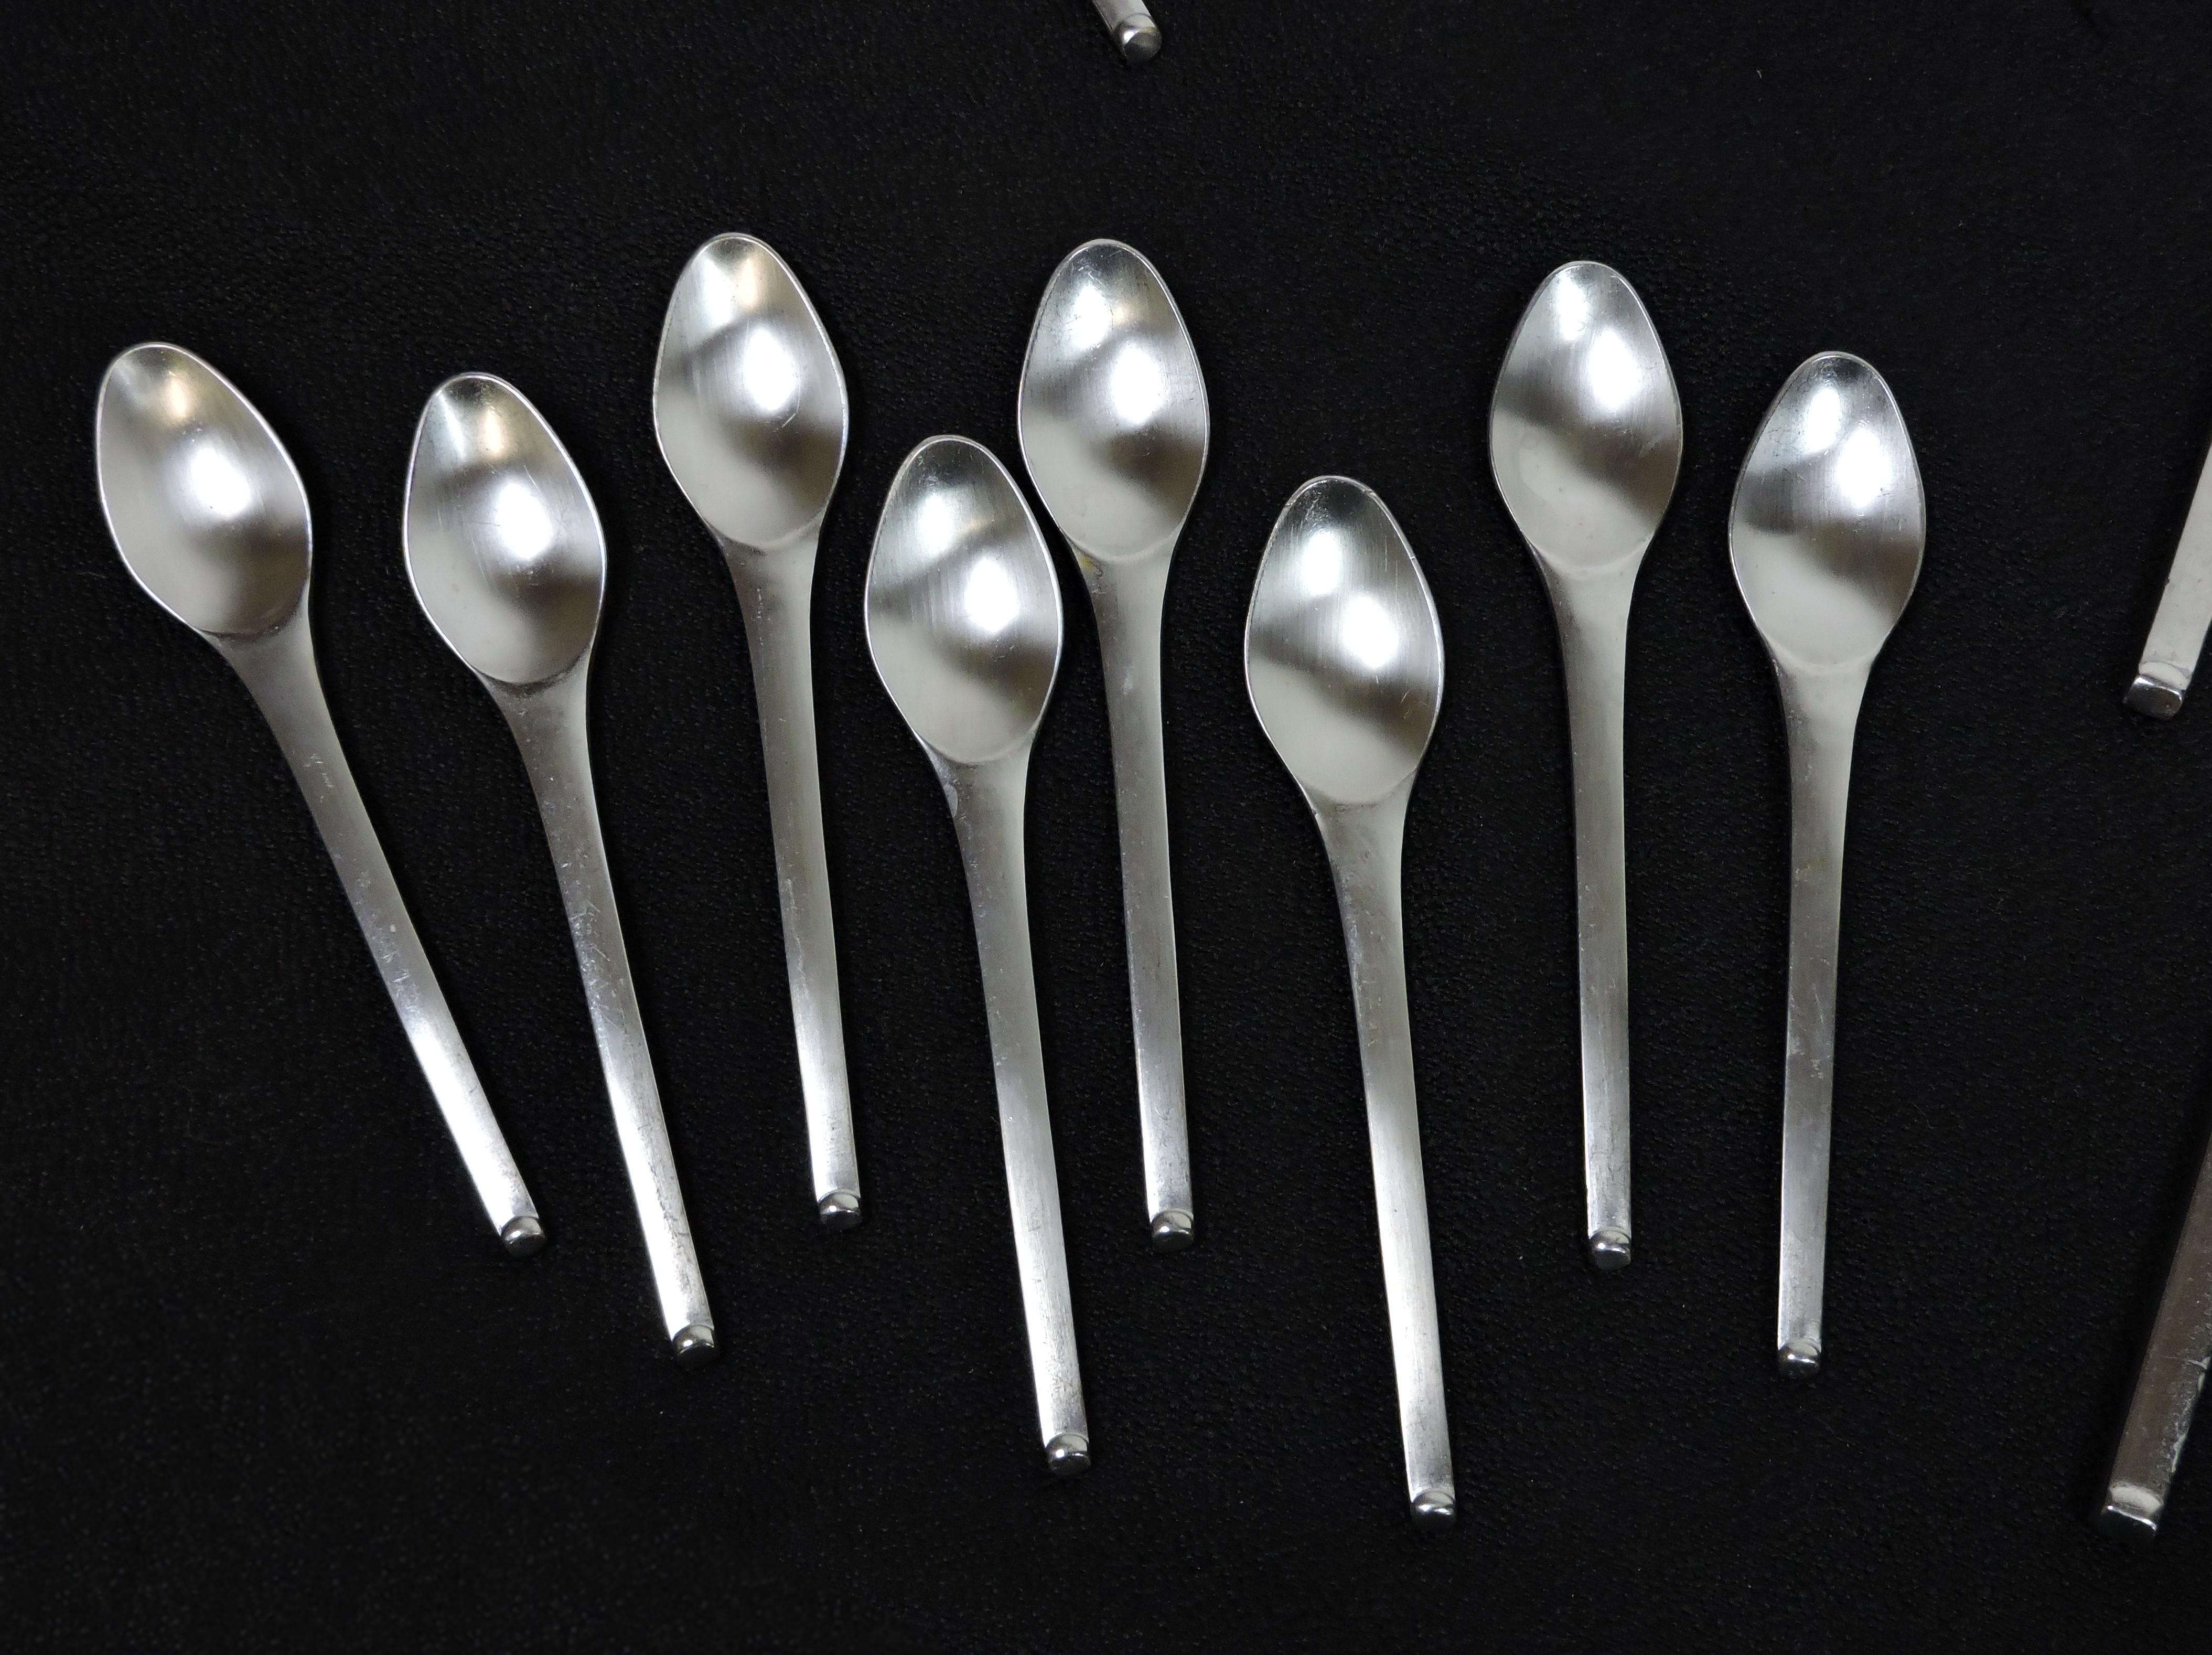 Beautiful 40 piece, service for eight, set of Stanley Roberts flatware service in the Contempra pattern. This set consists of 8 forks, 8 salad forks, 8 soup spoons, 8 teaspoons, and 8 knives. Heavy and well made, these have a great modernist look.